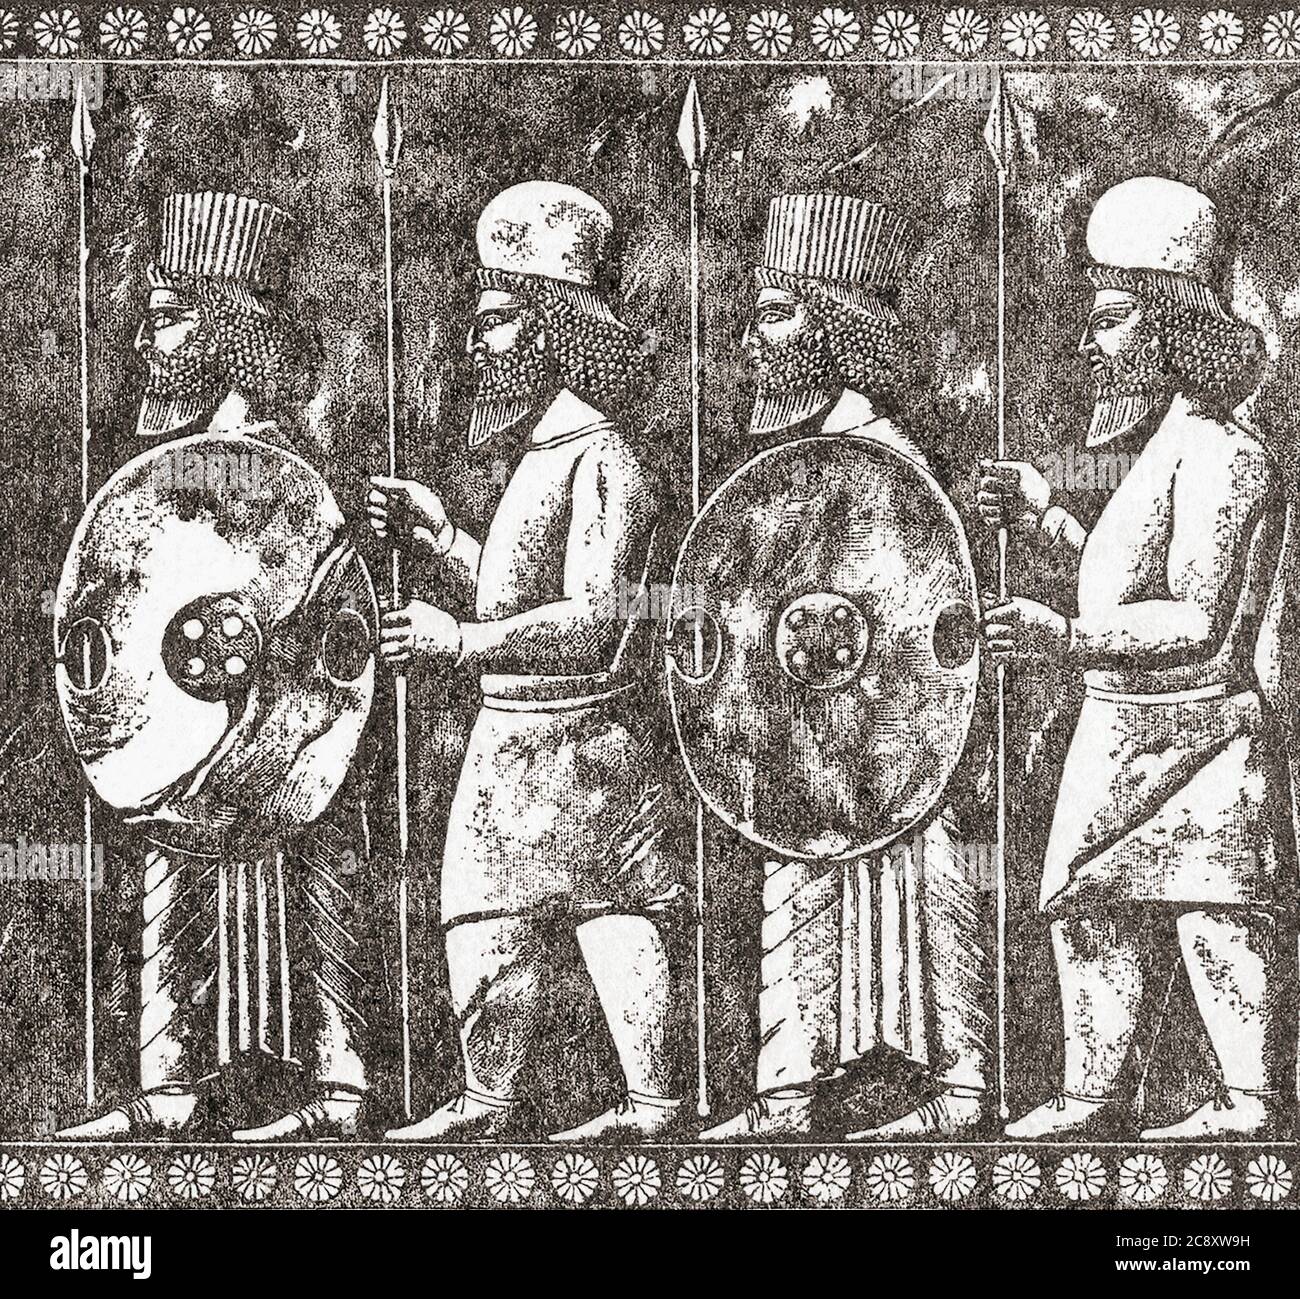 Median and Persian foot-soldiers. The Medes were a Mesoptamian people who after their tribes formed the Median Kingdom became Neo-Assyrian vassals. Through various alliances they subsequently destroyed the Neo-Assyrian Empire and they and their allies became the dominant force in Mesopotamia as the Median Empire.  After an illustration by an unidentified 19th century artist. Stock Photo